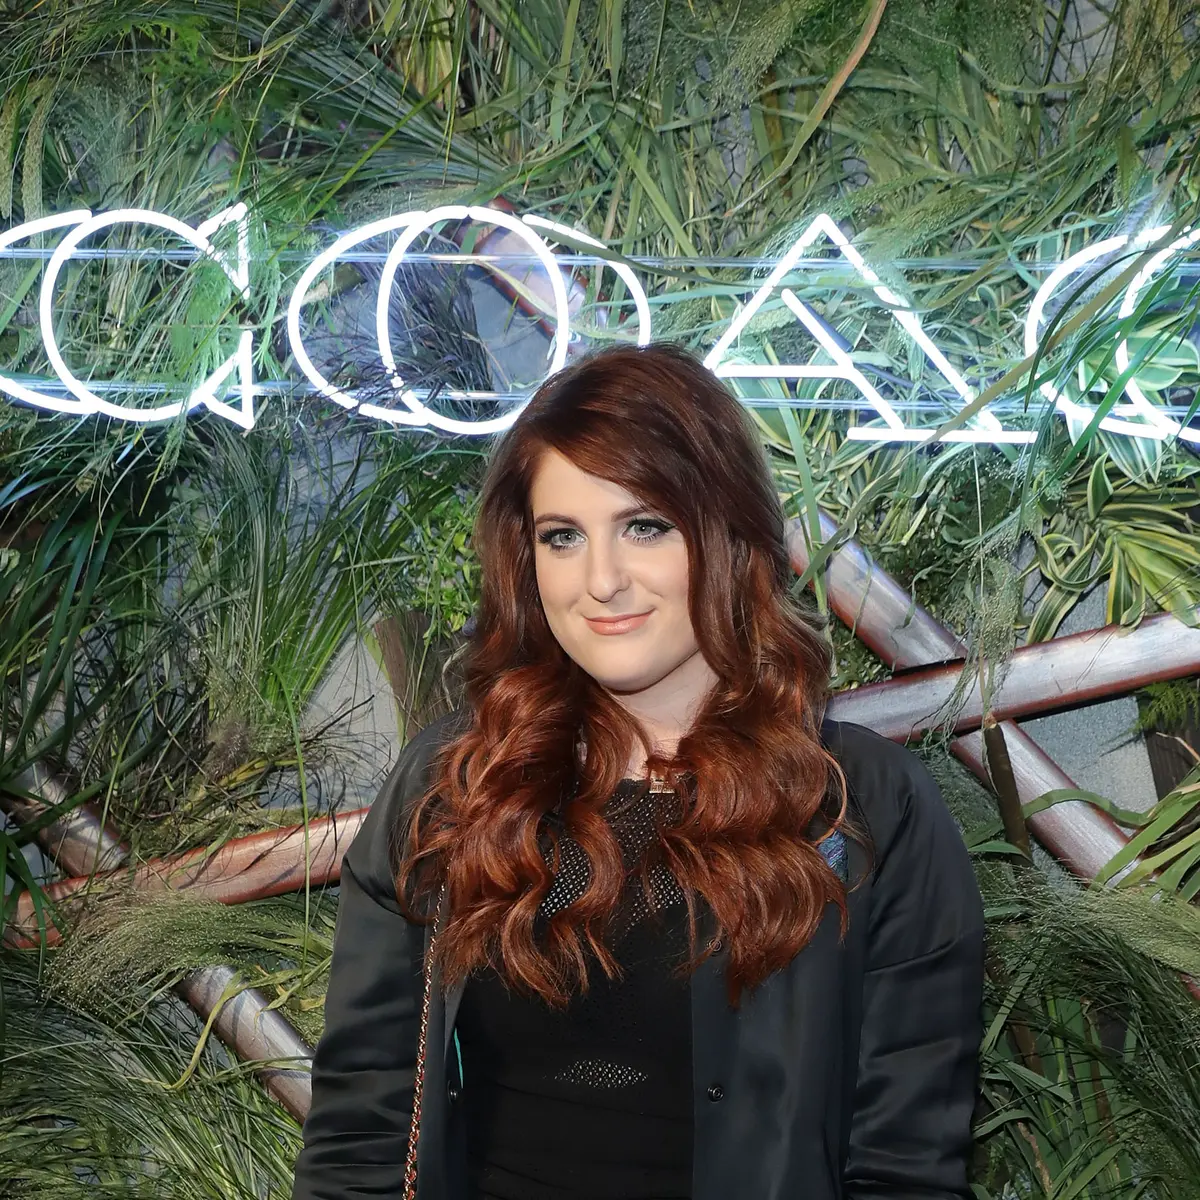 Lirik Lagu Made You Look - Meghan Trainor: I Could Have My Gucci On, I  Could Wear My Louis Vuitton 